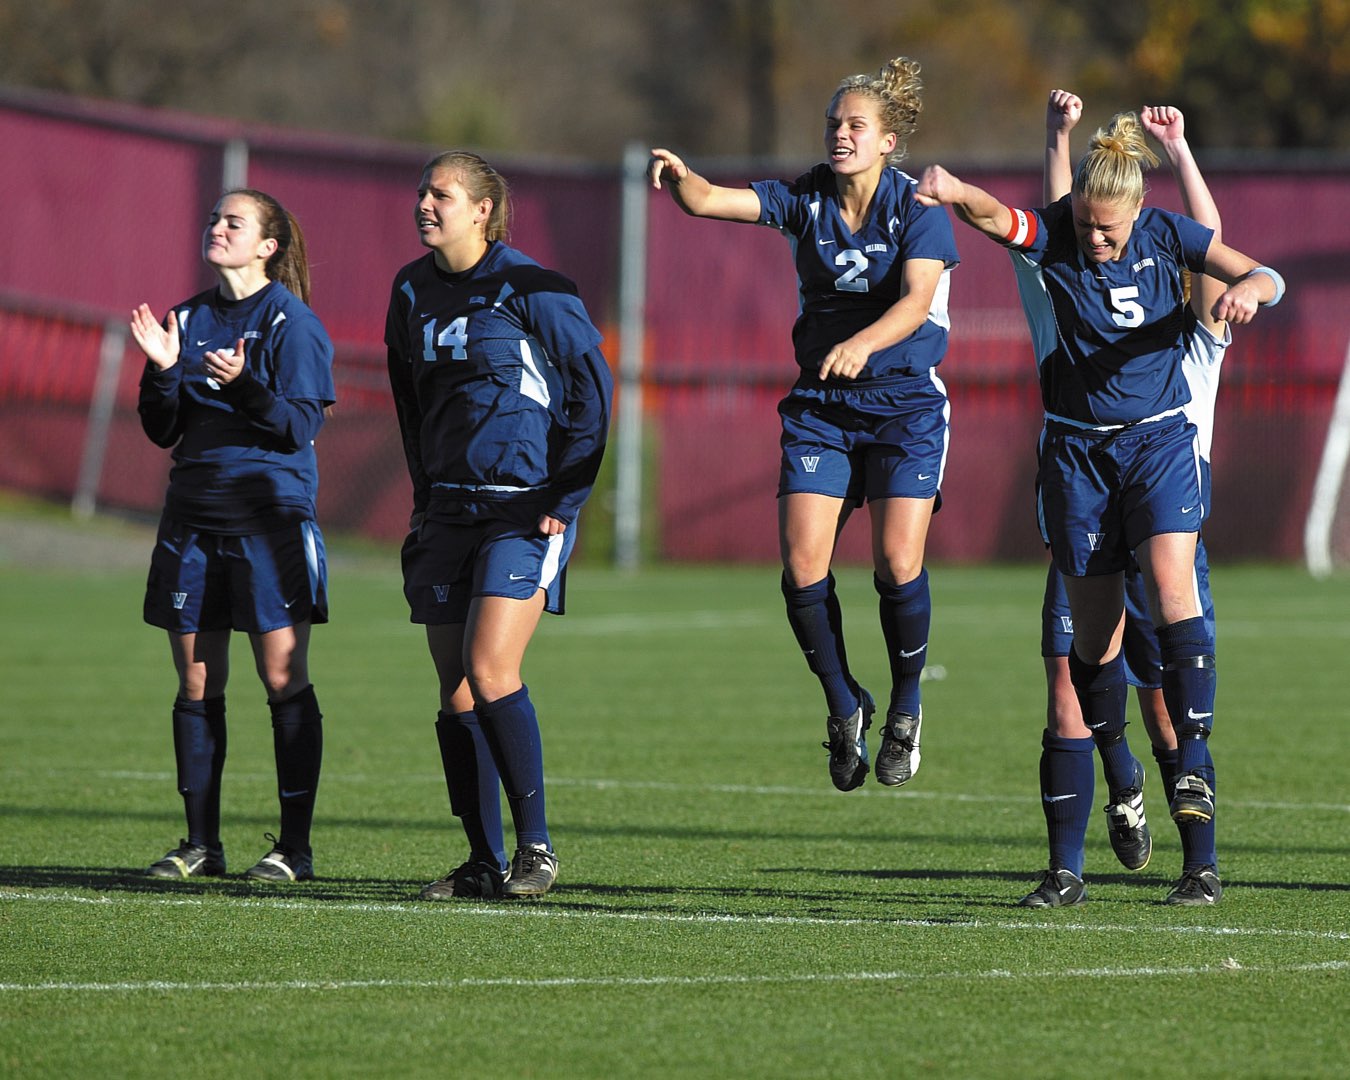 Five Villanova Women’s Soccer players in uniform on the field clapping, cheering and jumping in the air